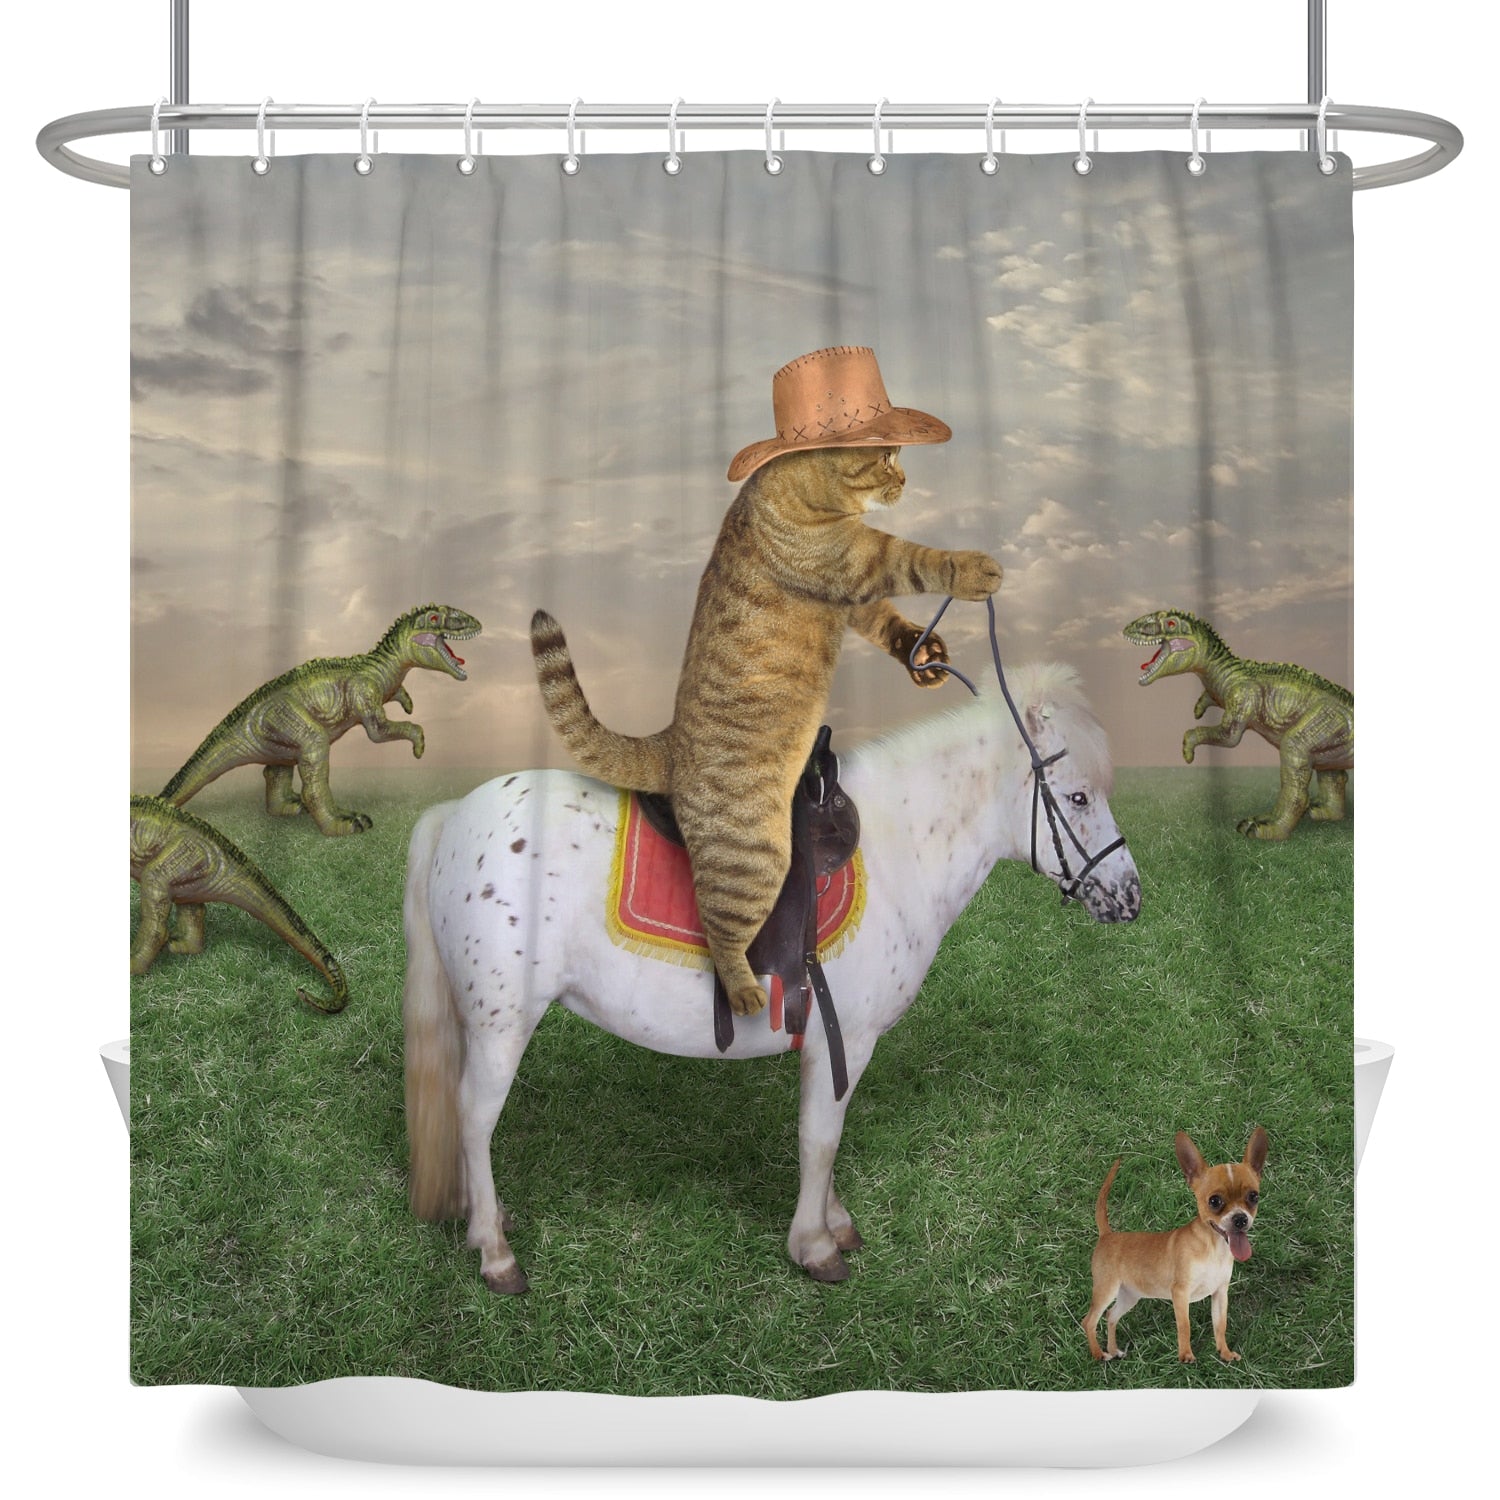 Cat on Horse Shower Curtain - Horse / W120xH180cm